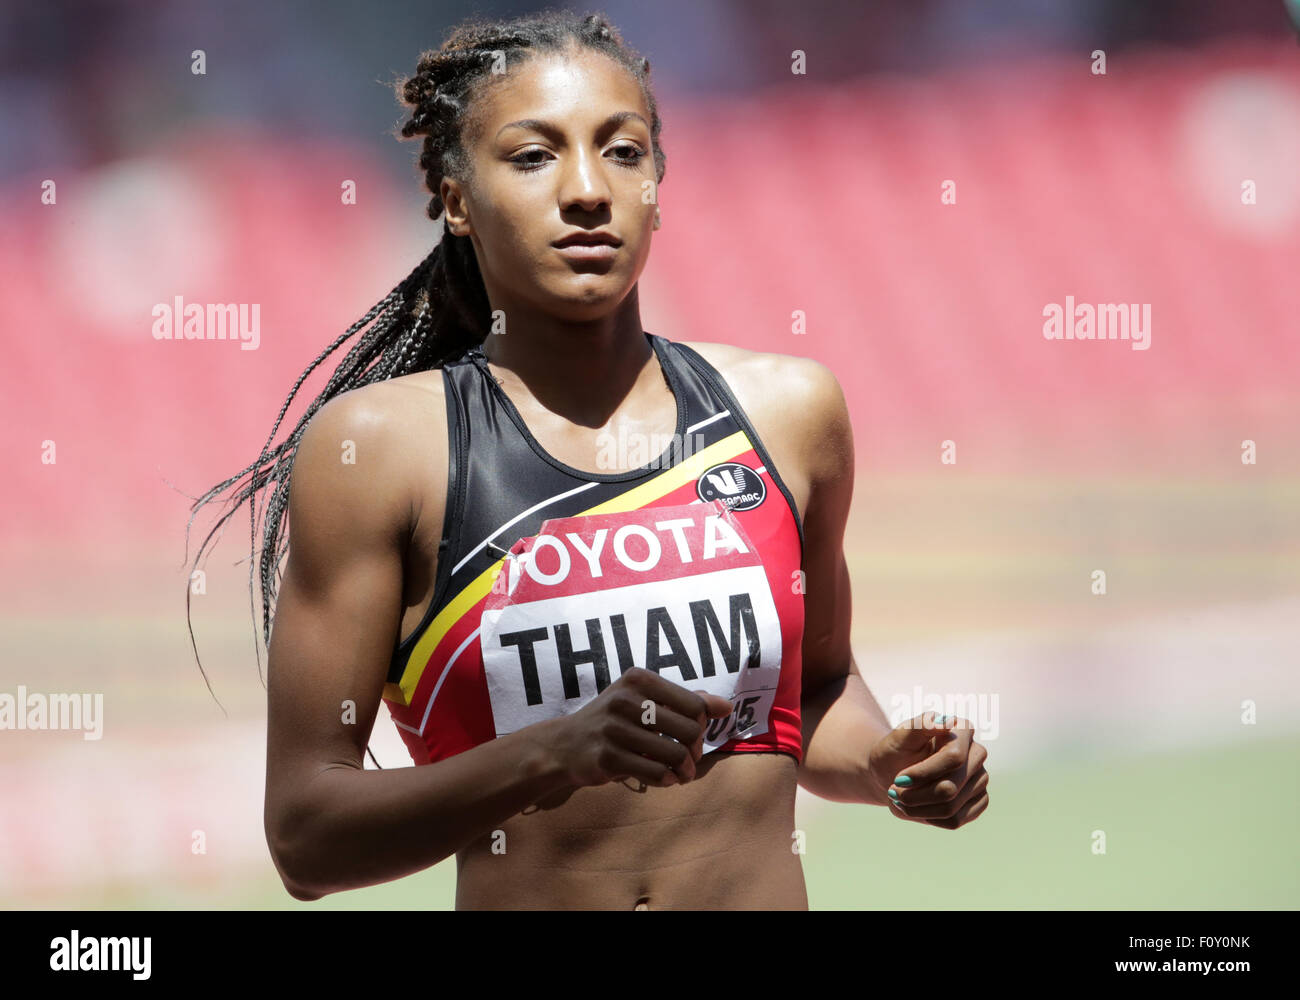 Beijing, China. 22nd Aug, 2015. Belgium's Nafissatou Thiam pictured at the Heptathlon competition during the 15th International Association of Athletics Federations (IAAF) Athletics World Championships in Beijing, China, 22 August 2015. Photo: Michael Kappeler/dpa/Alamy Live News Stock Photo